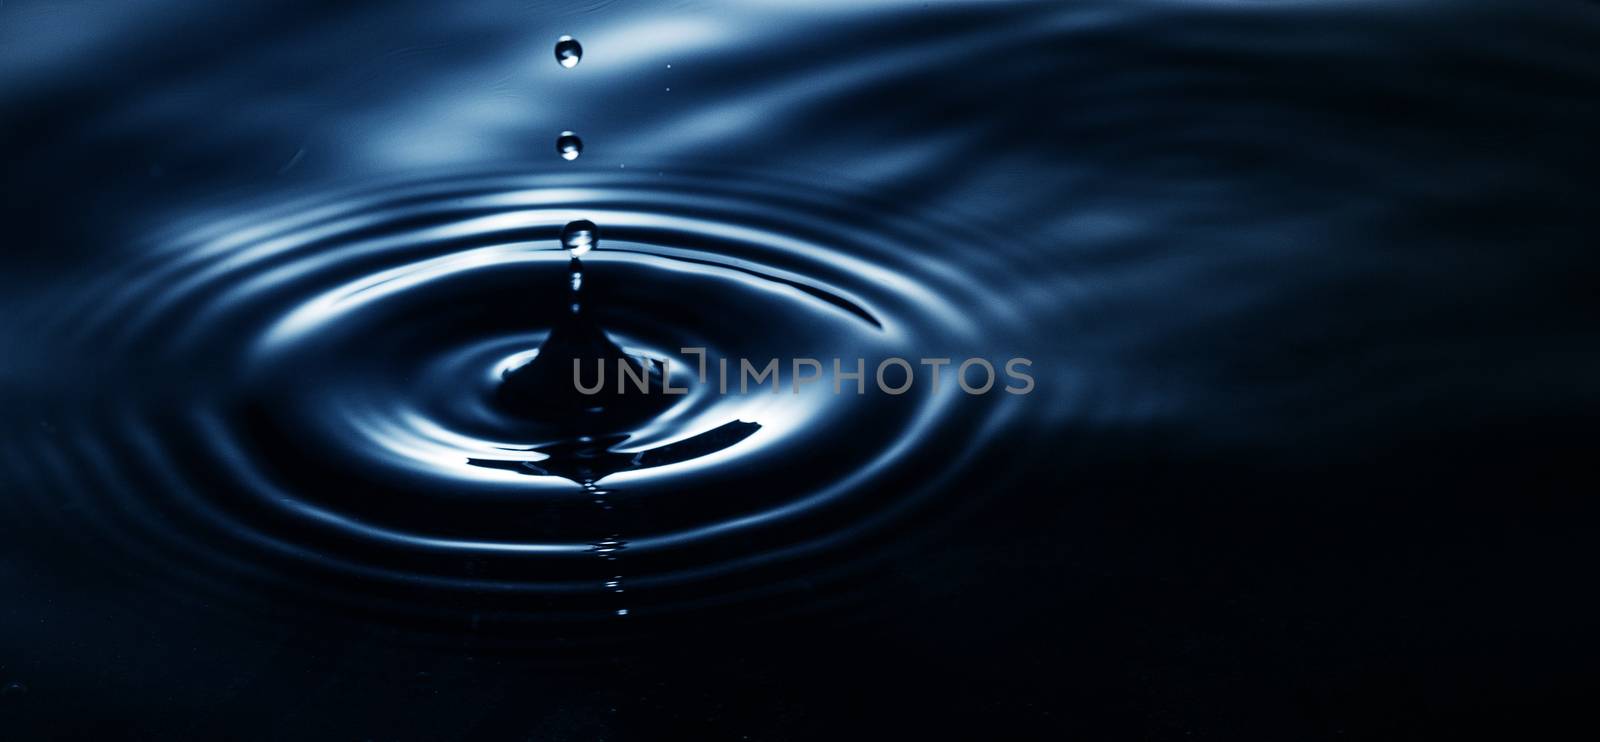 Water is moving from the fall of a droplet